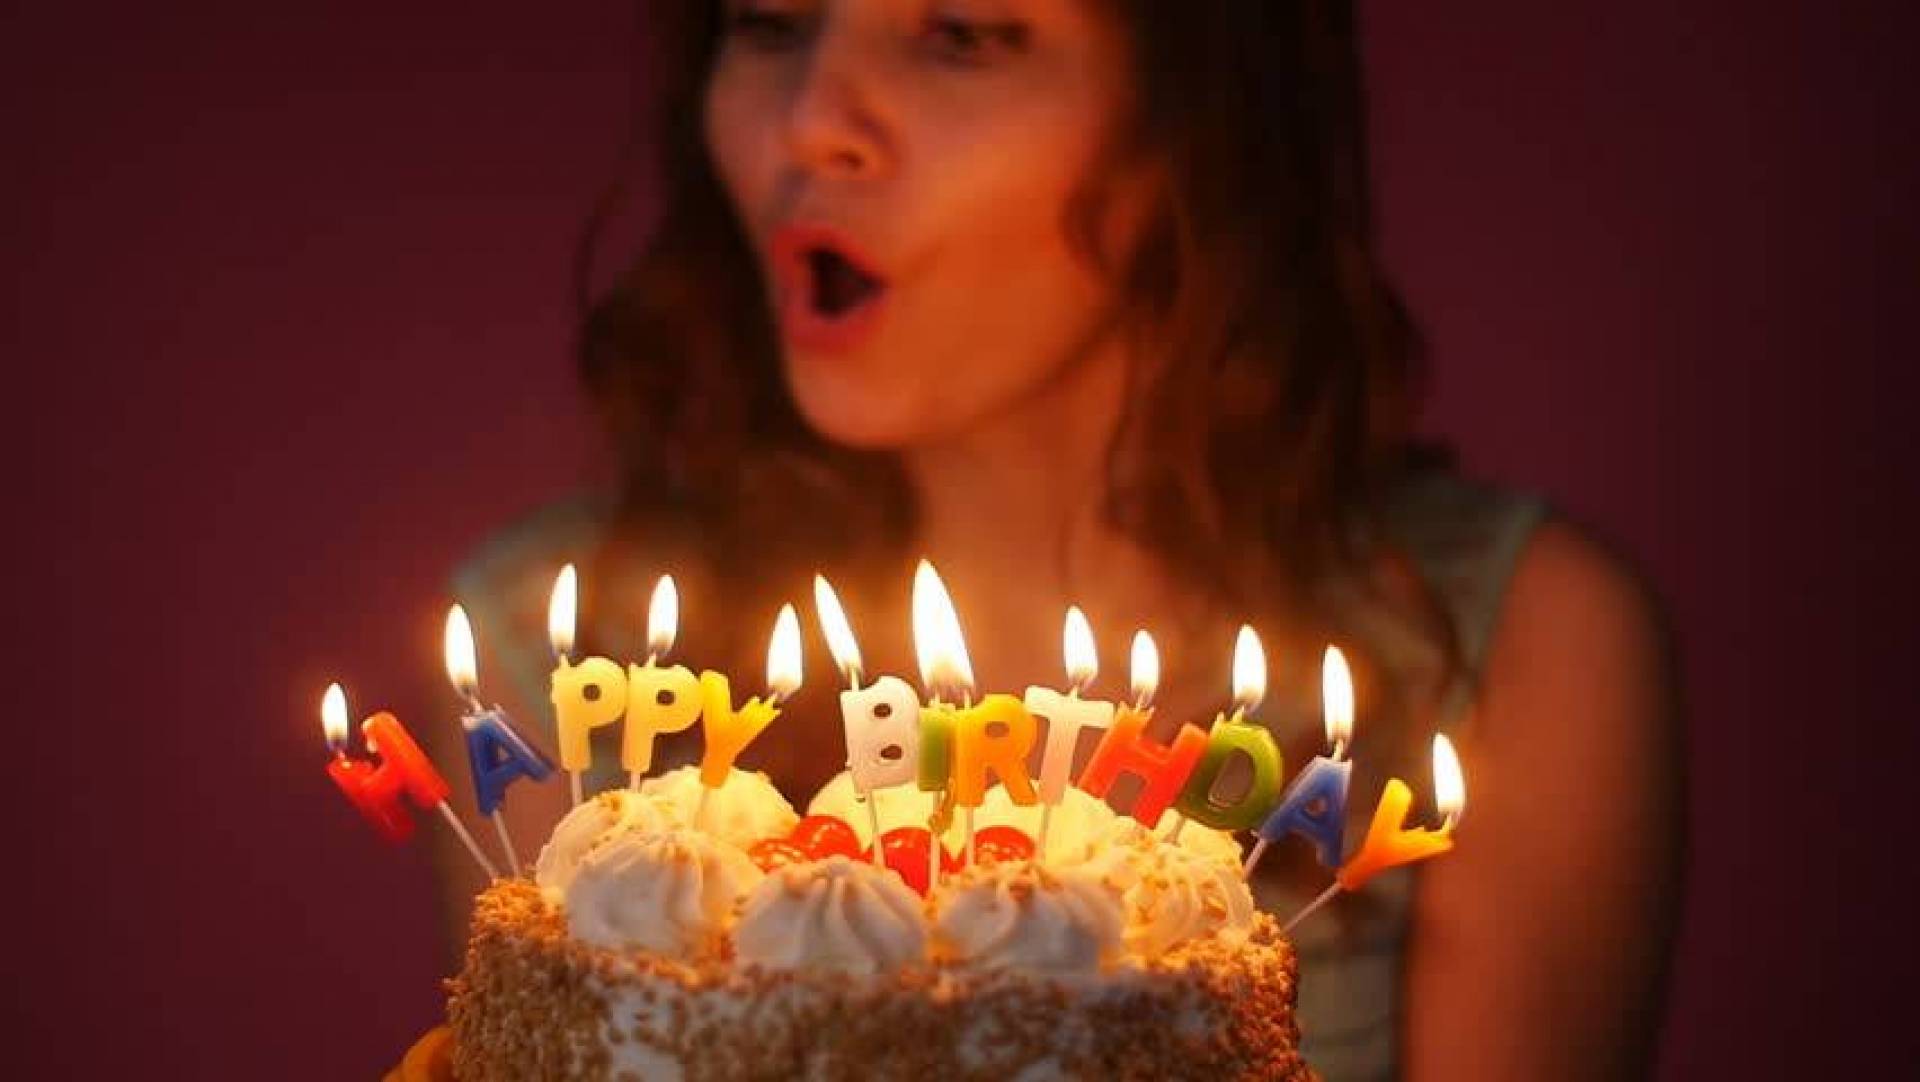 Blow Out The Candles Wallpapers High Quality | Download Free